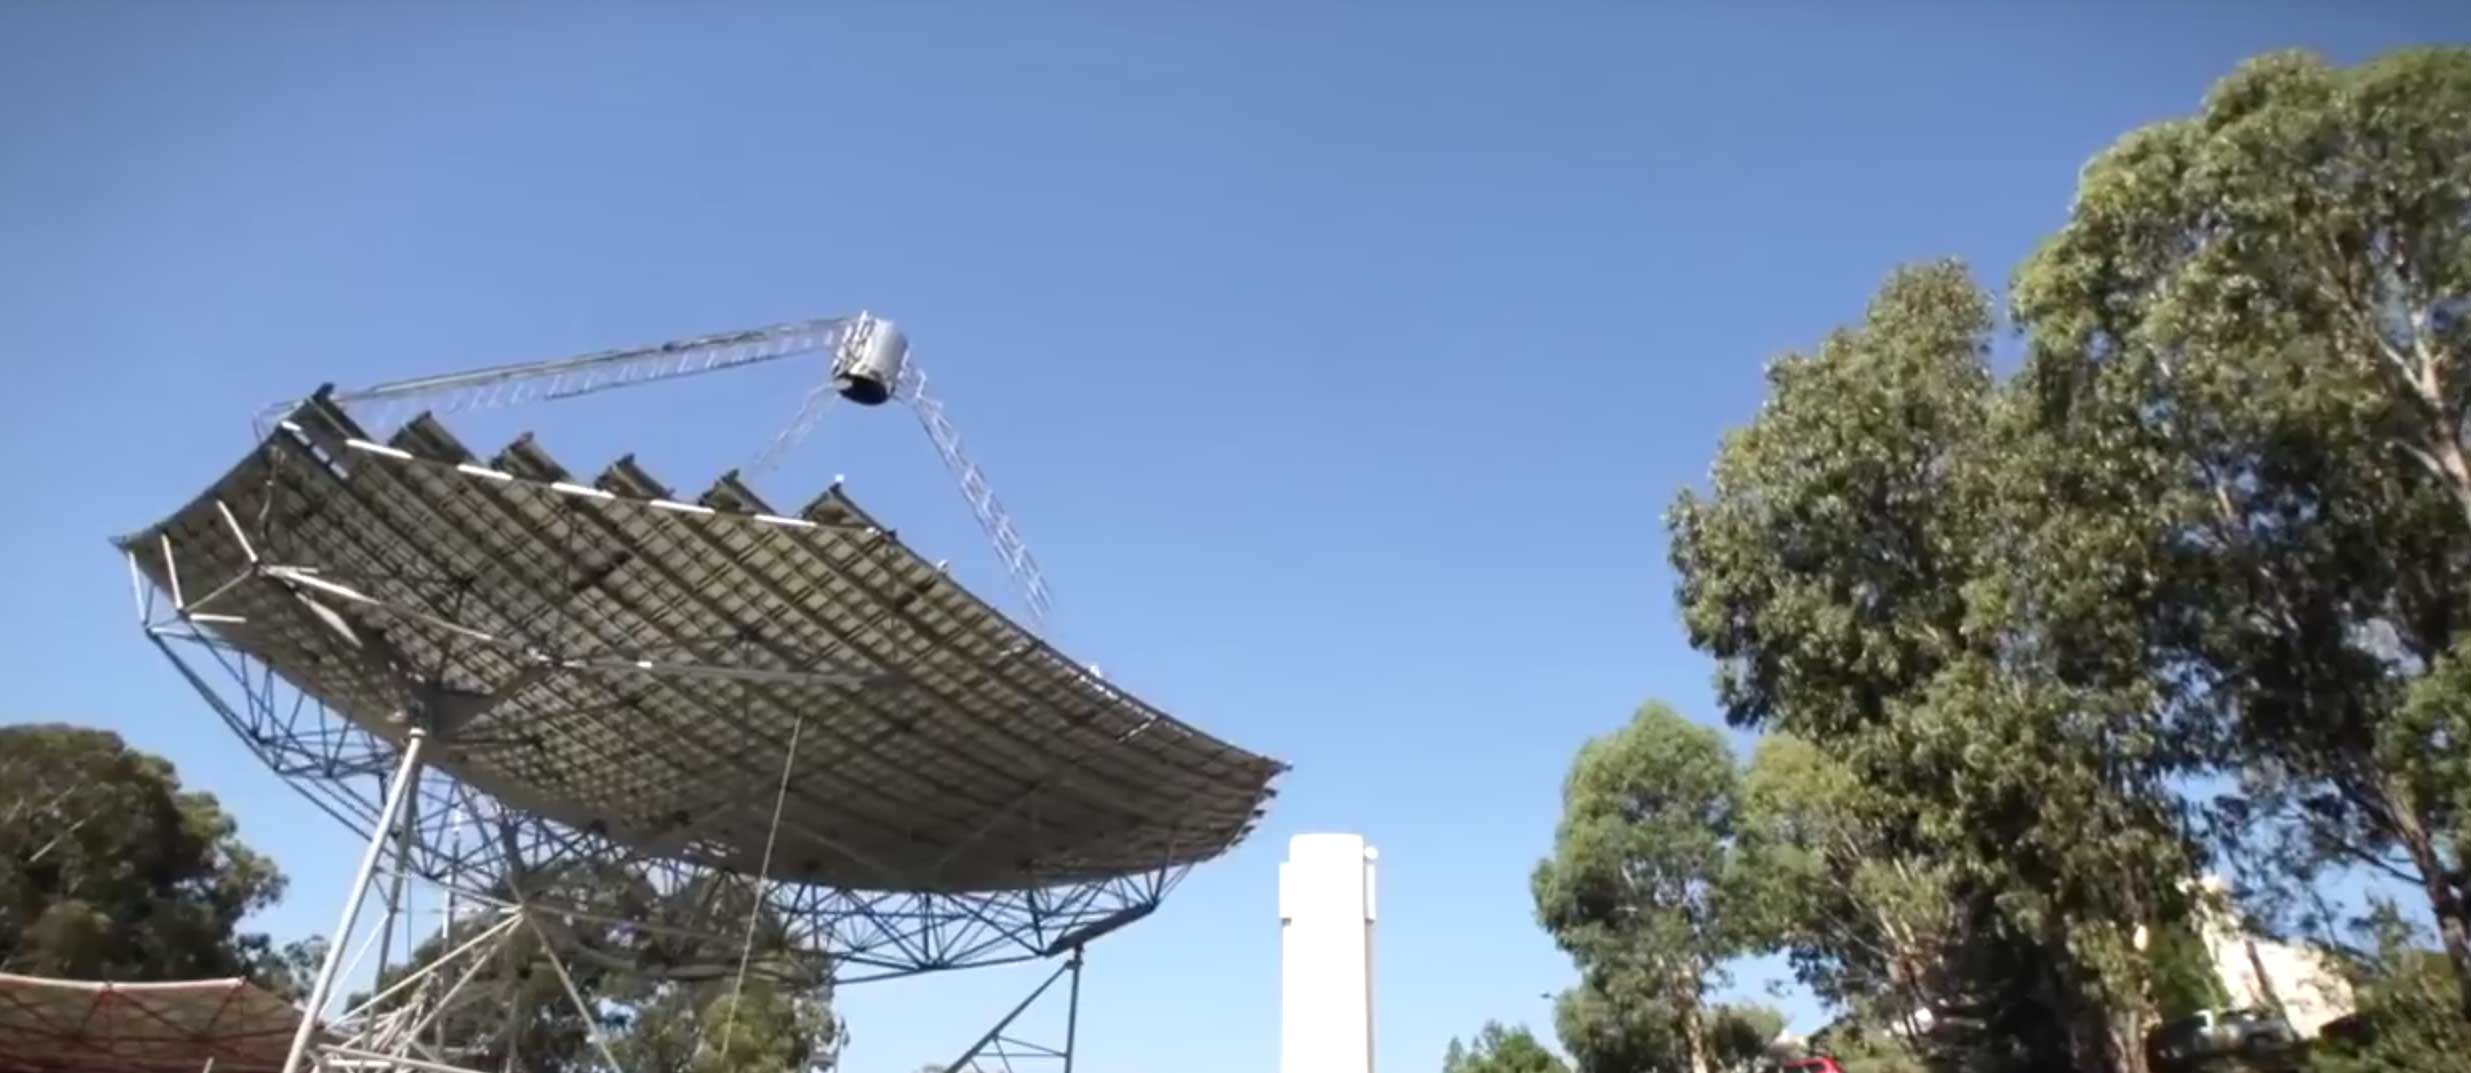 Image - Concentrated solar thermal receiver